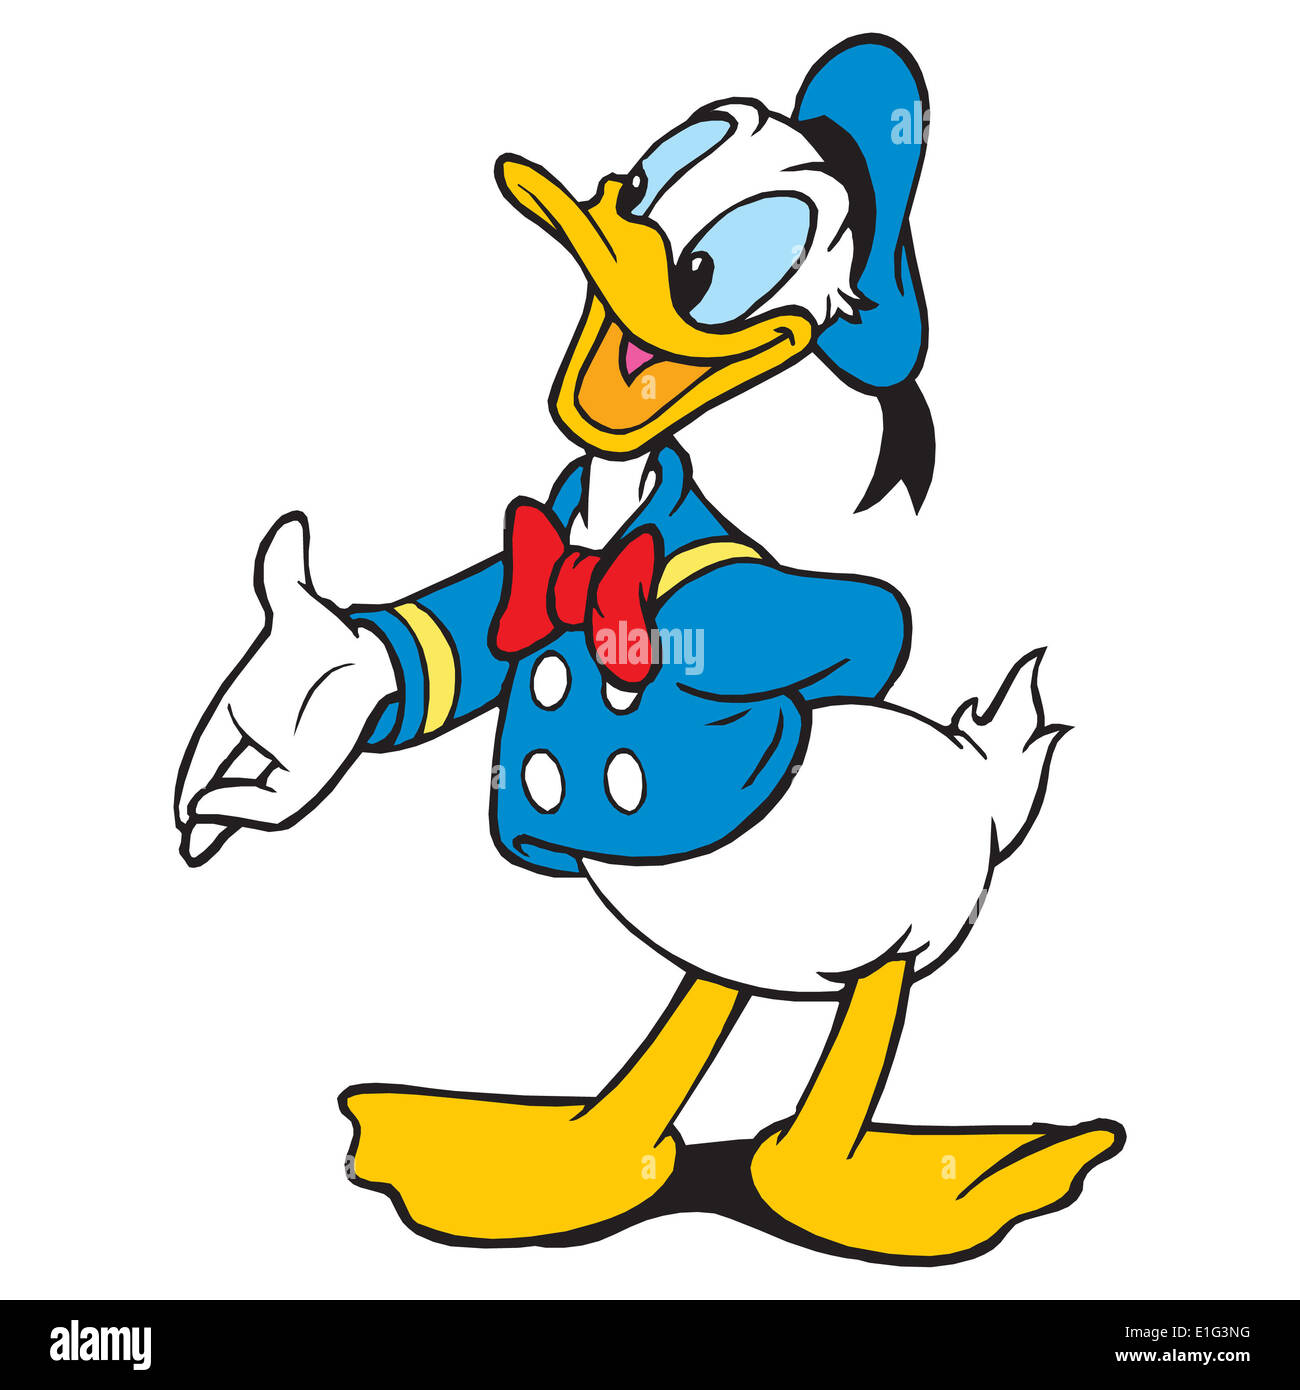 Half Naked Women Get Thousands Of Upvotes How About This Donald In